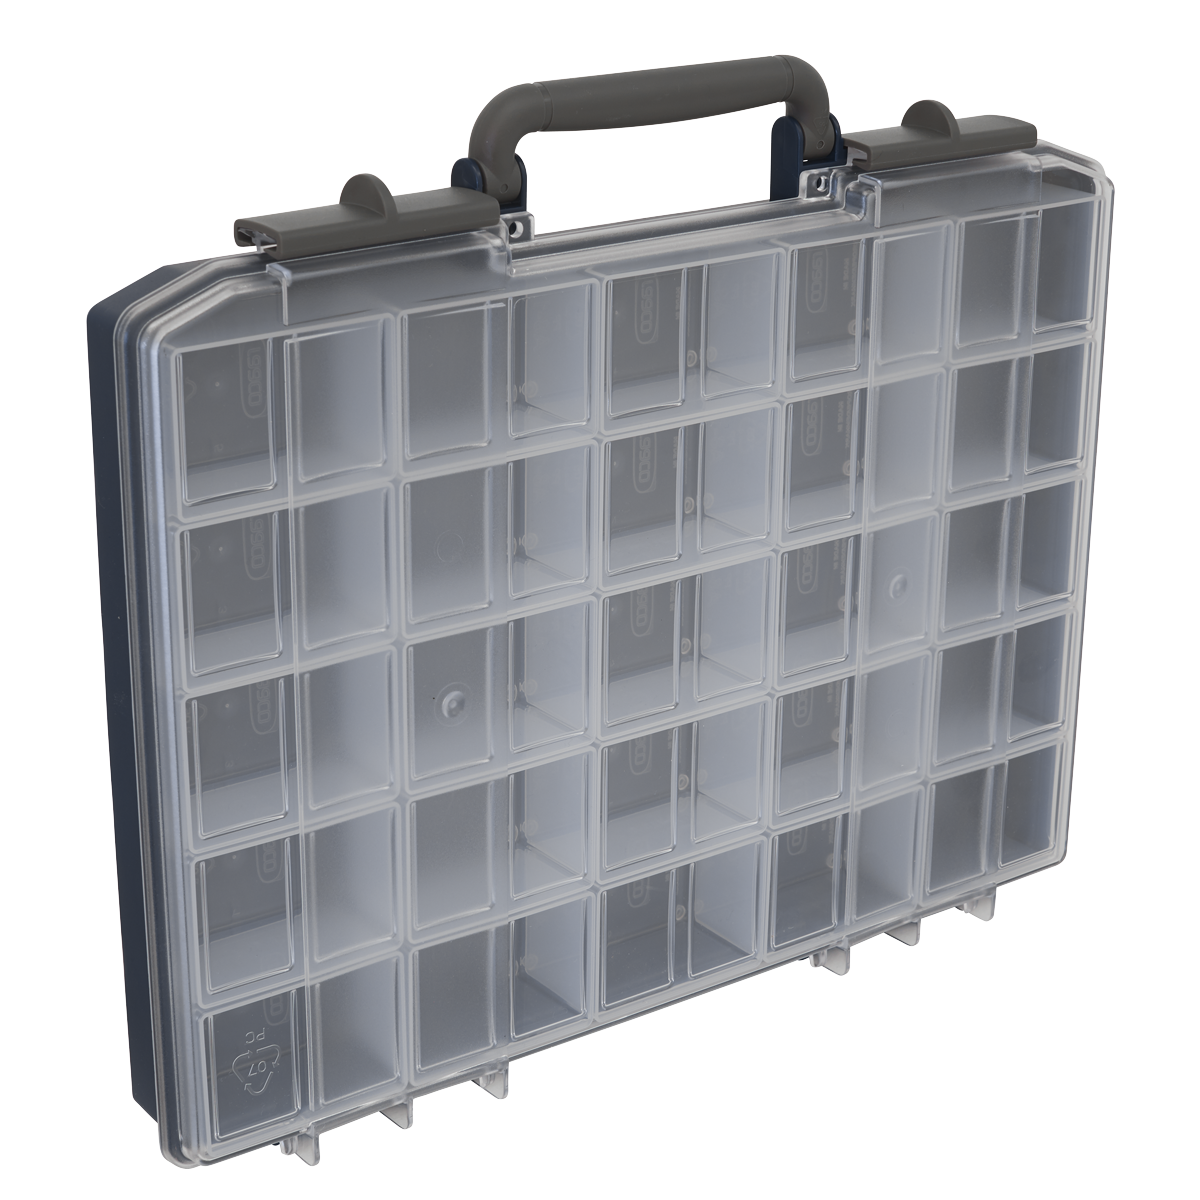 Sealey storage for small fixing, screws, fuses and components